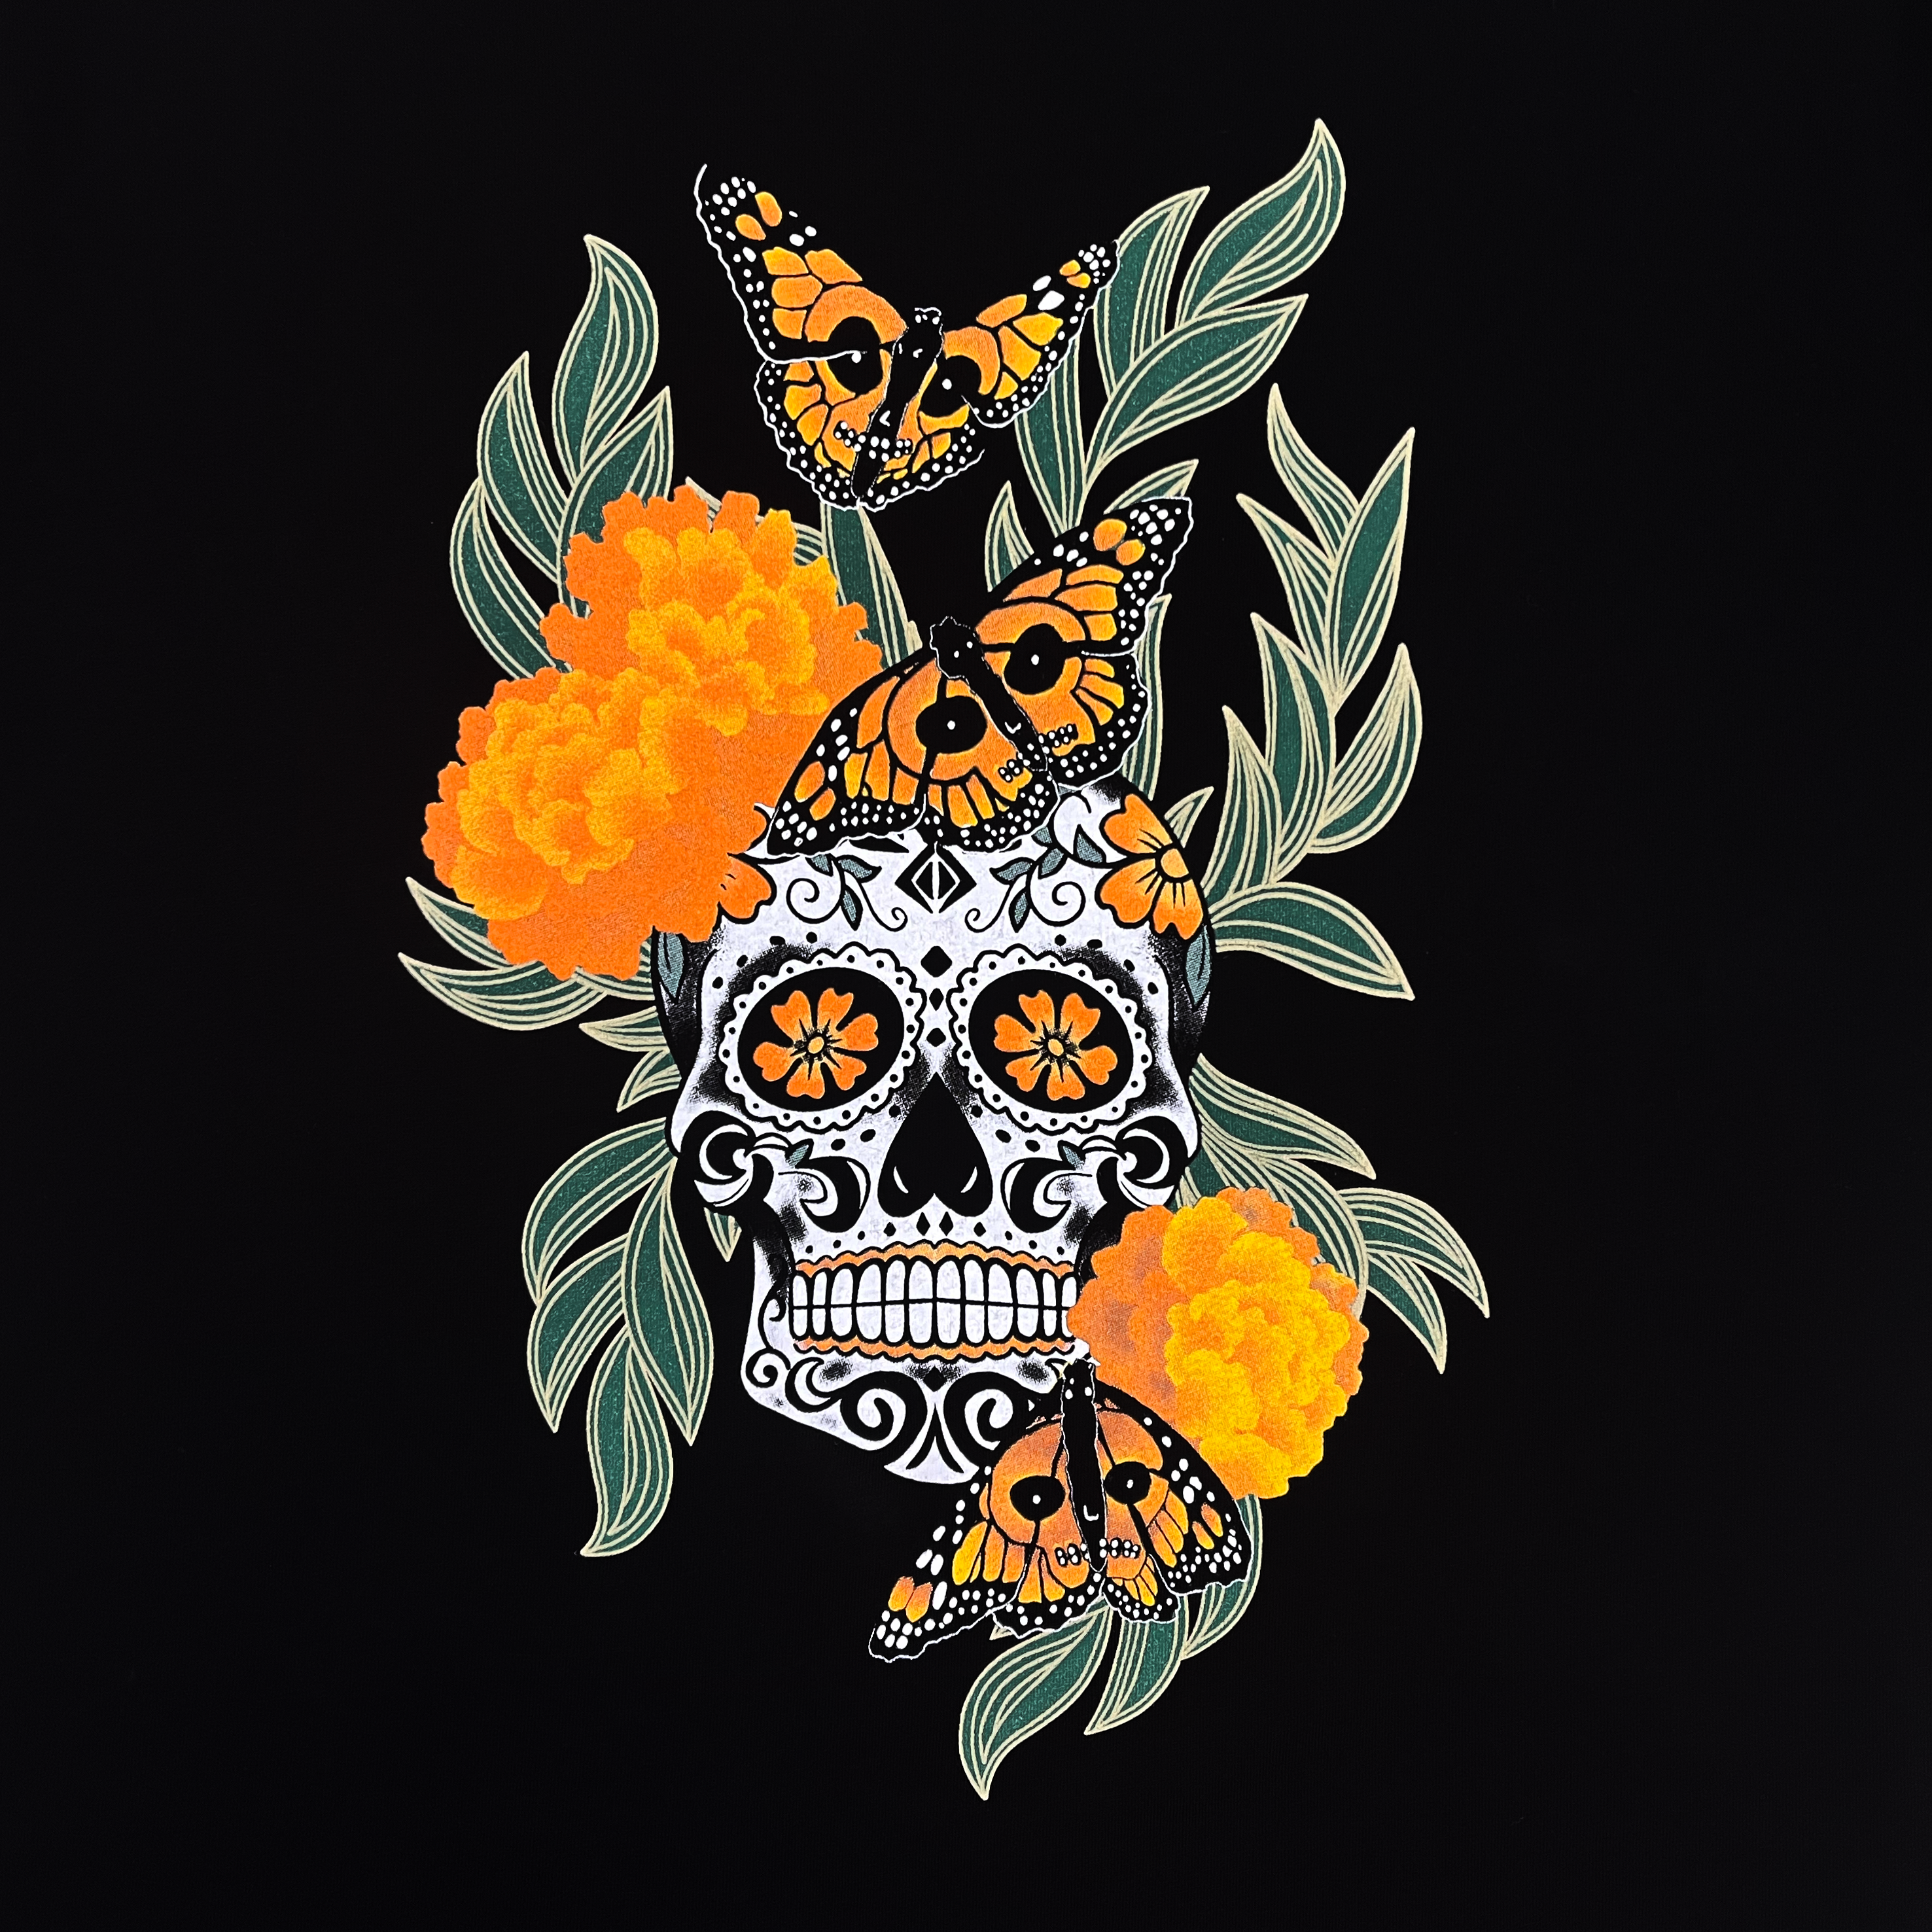 A close-up of Oakland artist Jet Martinez's graphic art depicts a sugar skull surrounded by Marigolds and Monarch butterflies on a black youth t-shirt.